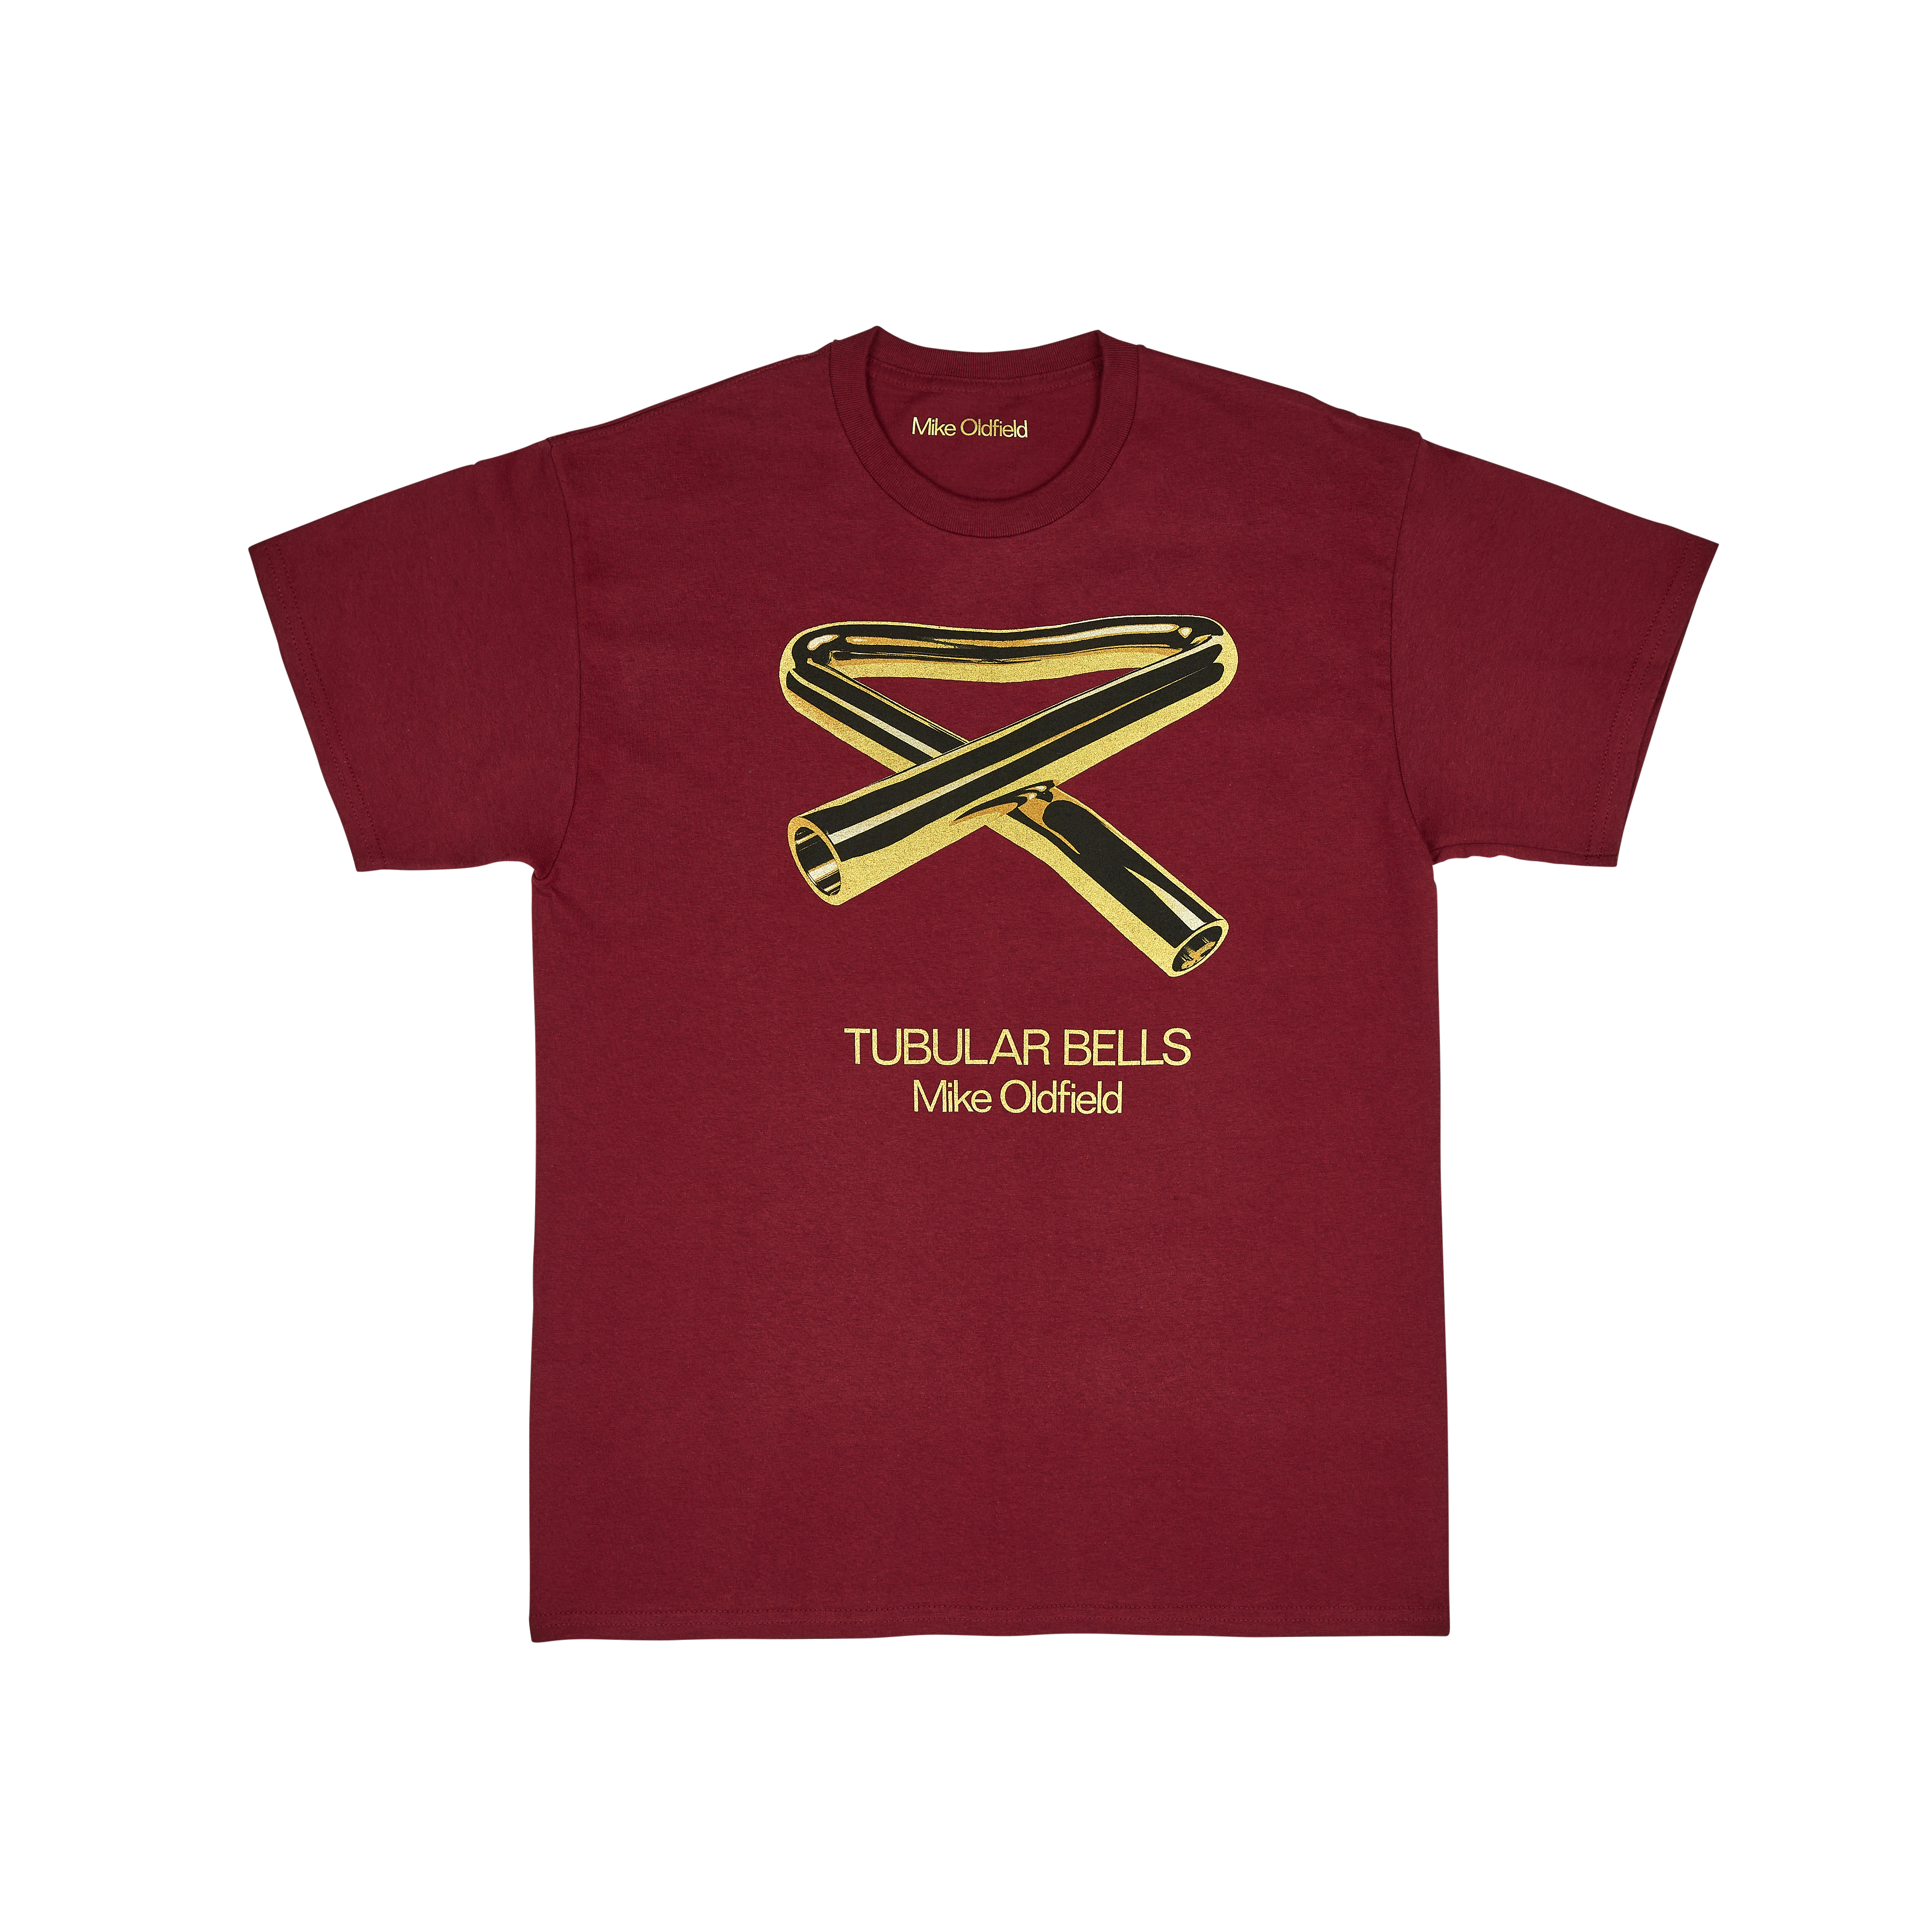 Mike Oldfield - Official Tubular Bells Anniversary T-shirt (Maroon)